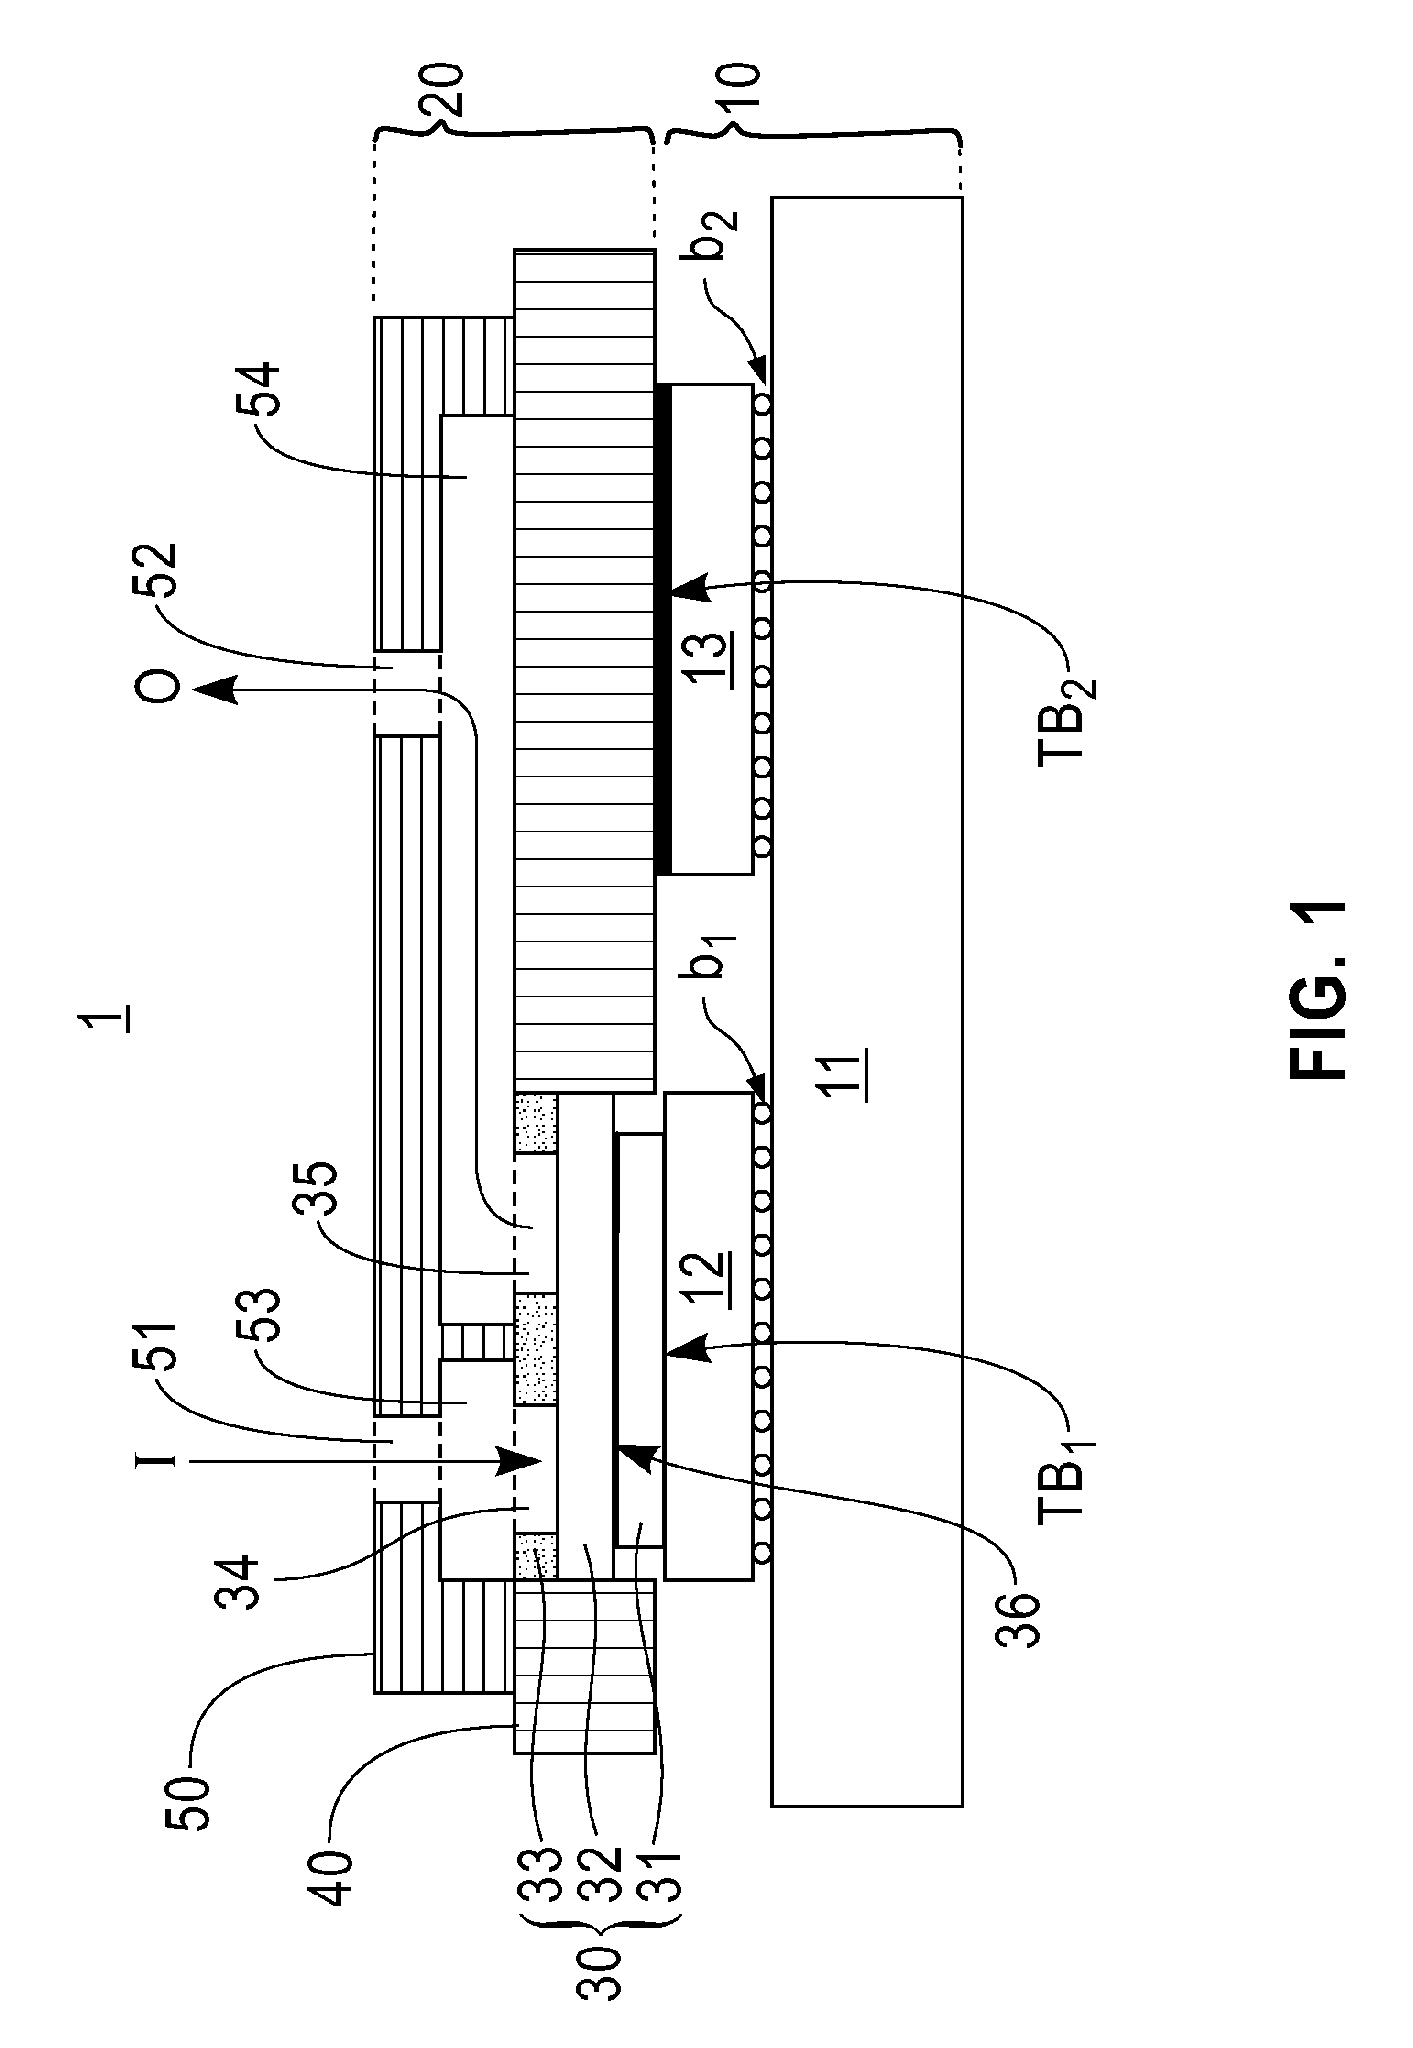 Apparatus and methods for high-performance liquid cooling of multiple chips with disparate cooling requirements